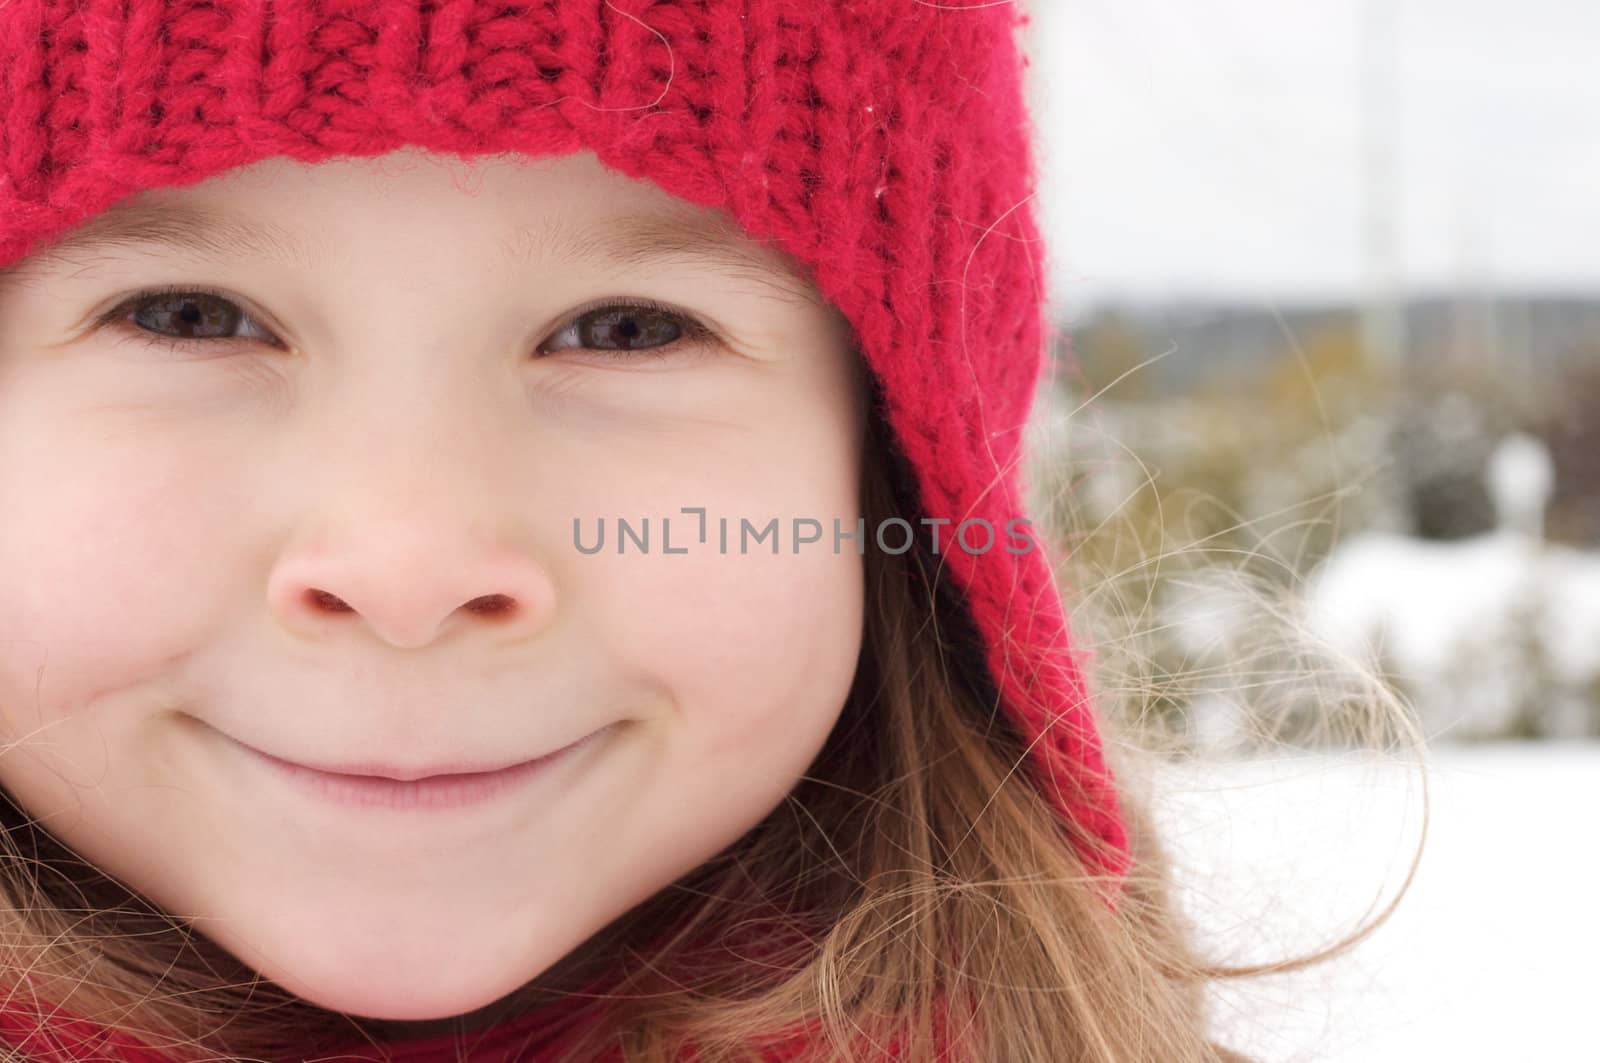 Cute little girl playing in the snow